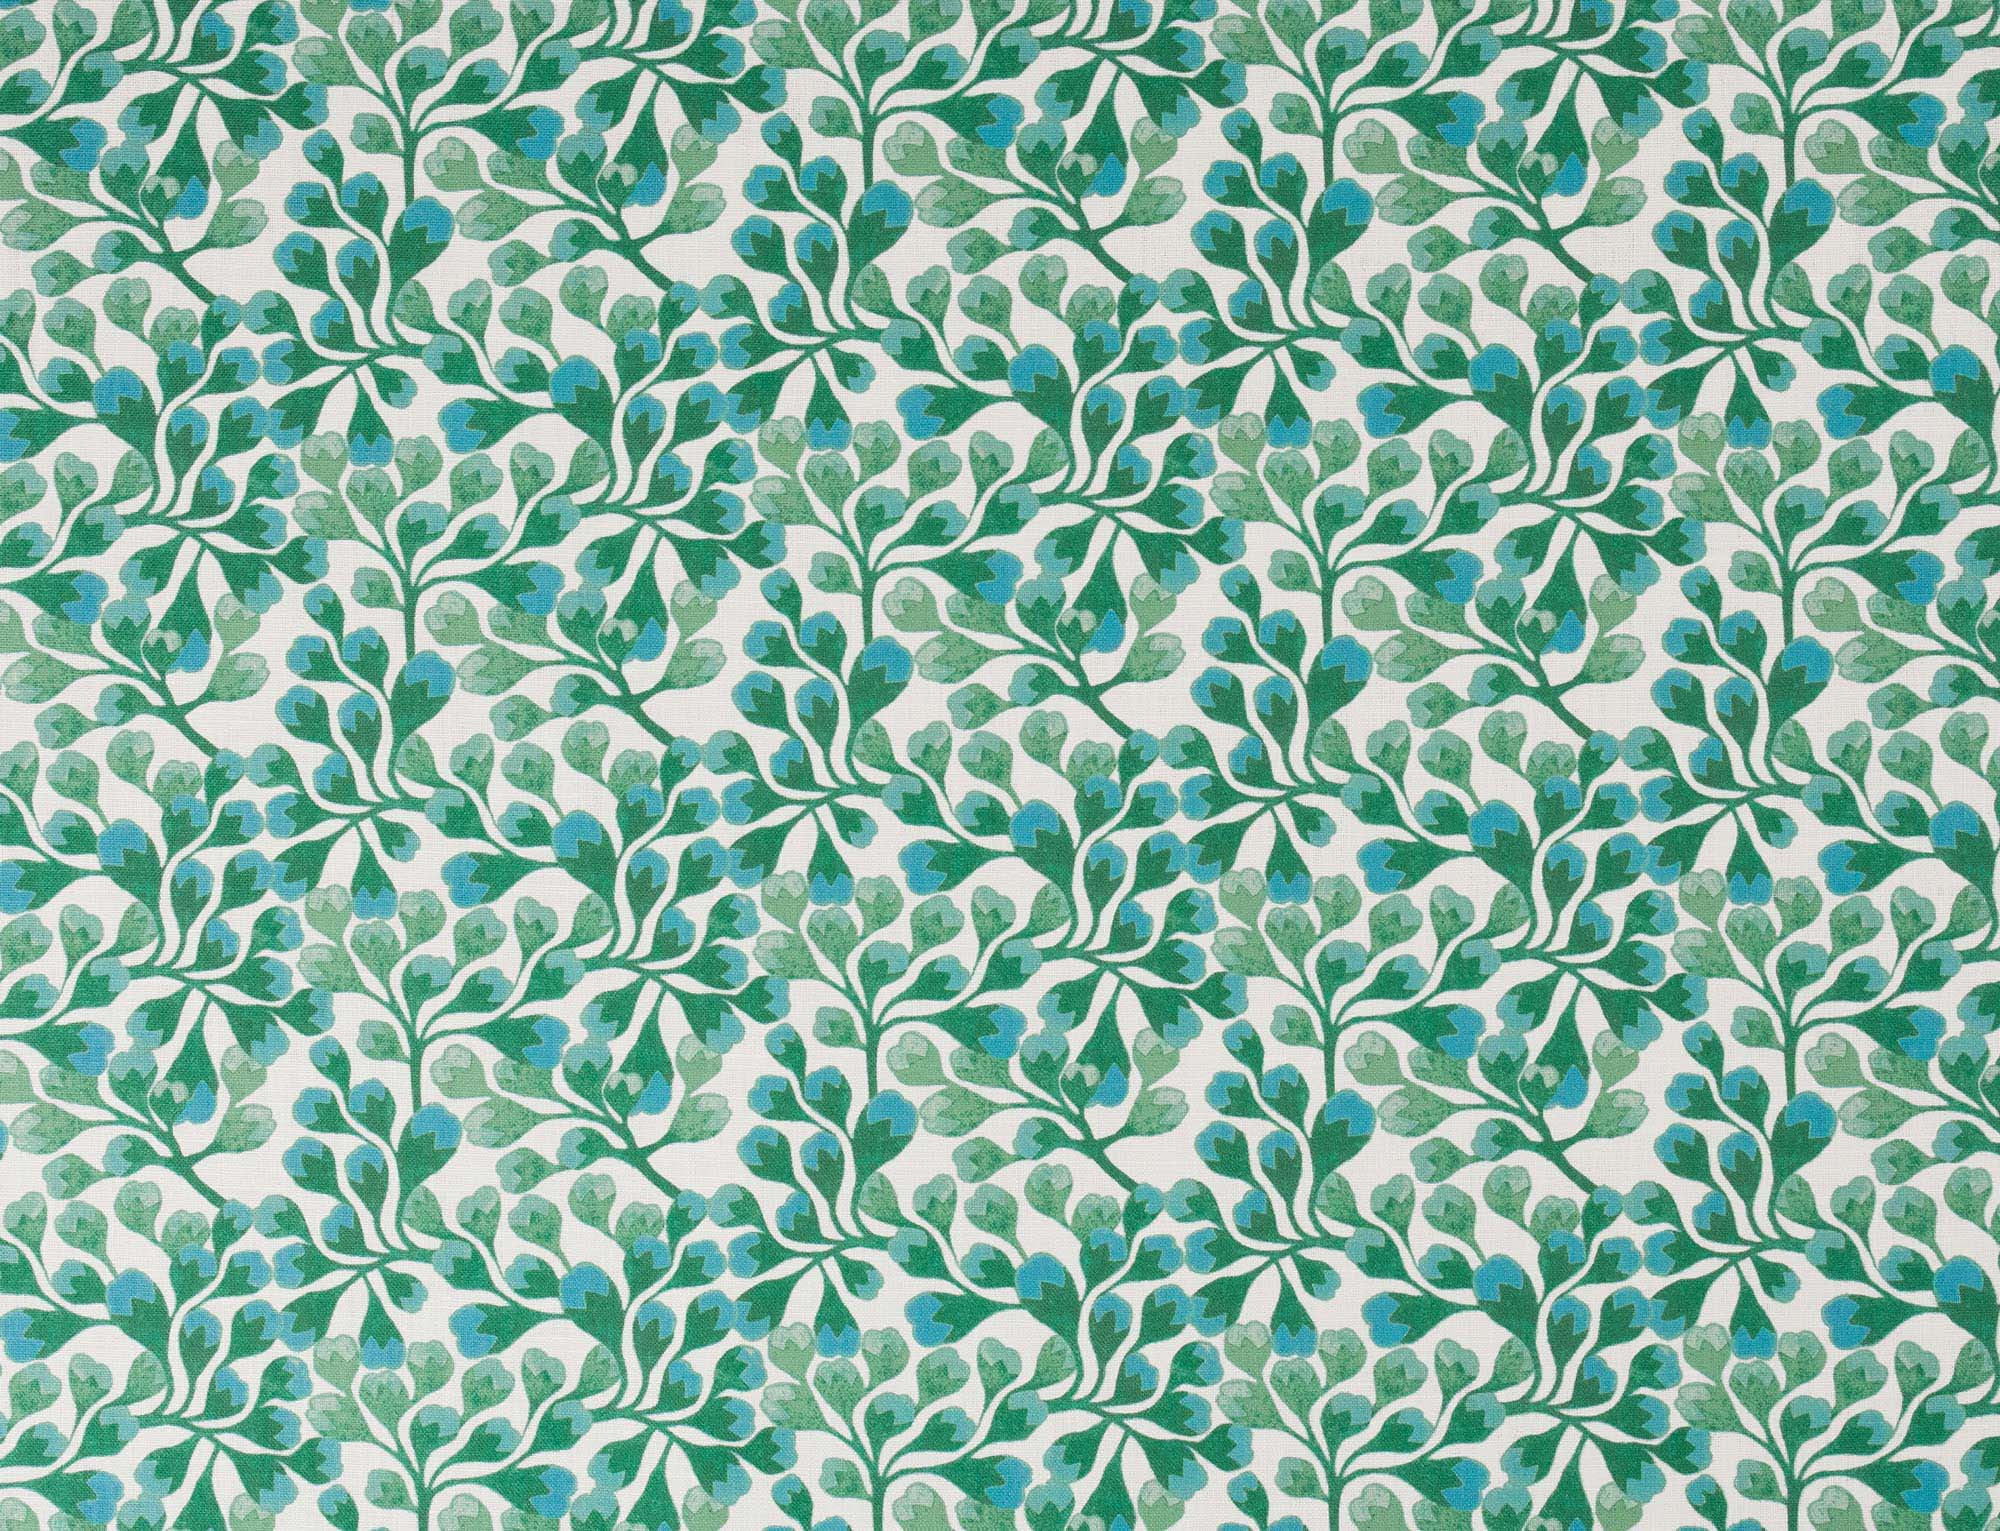 Detail of fabric in an abstract botanical print in green and turquoise on a white field.